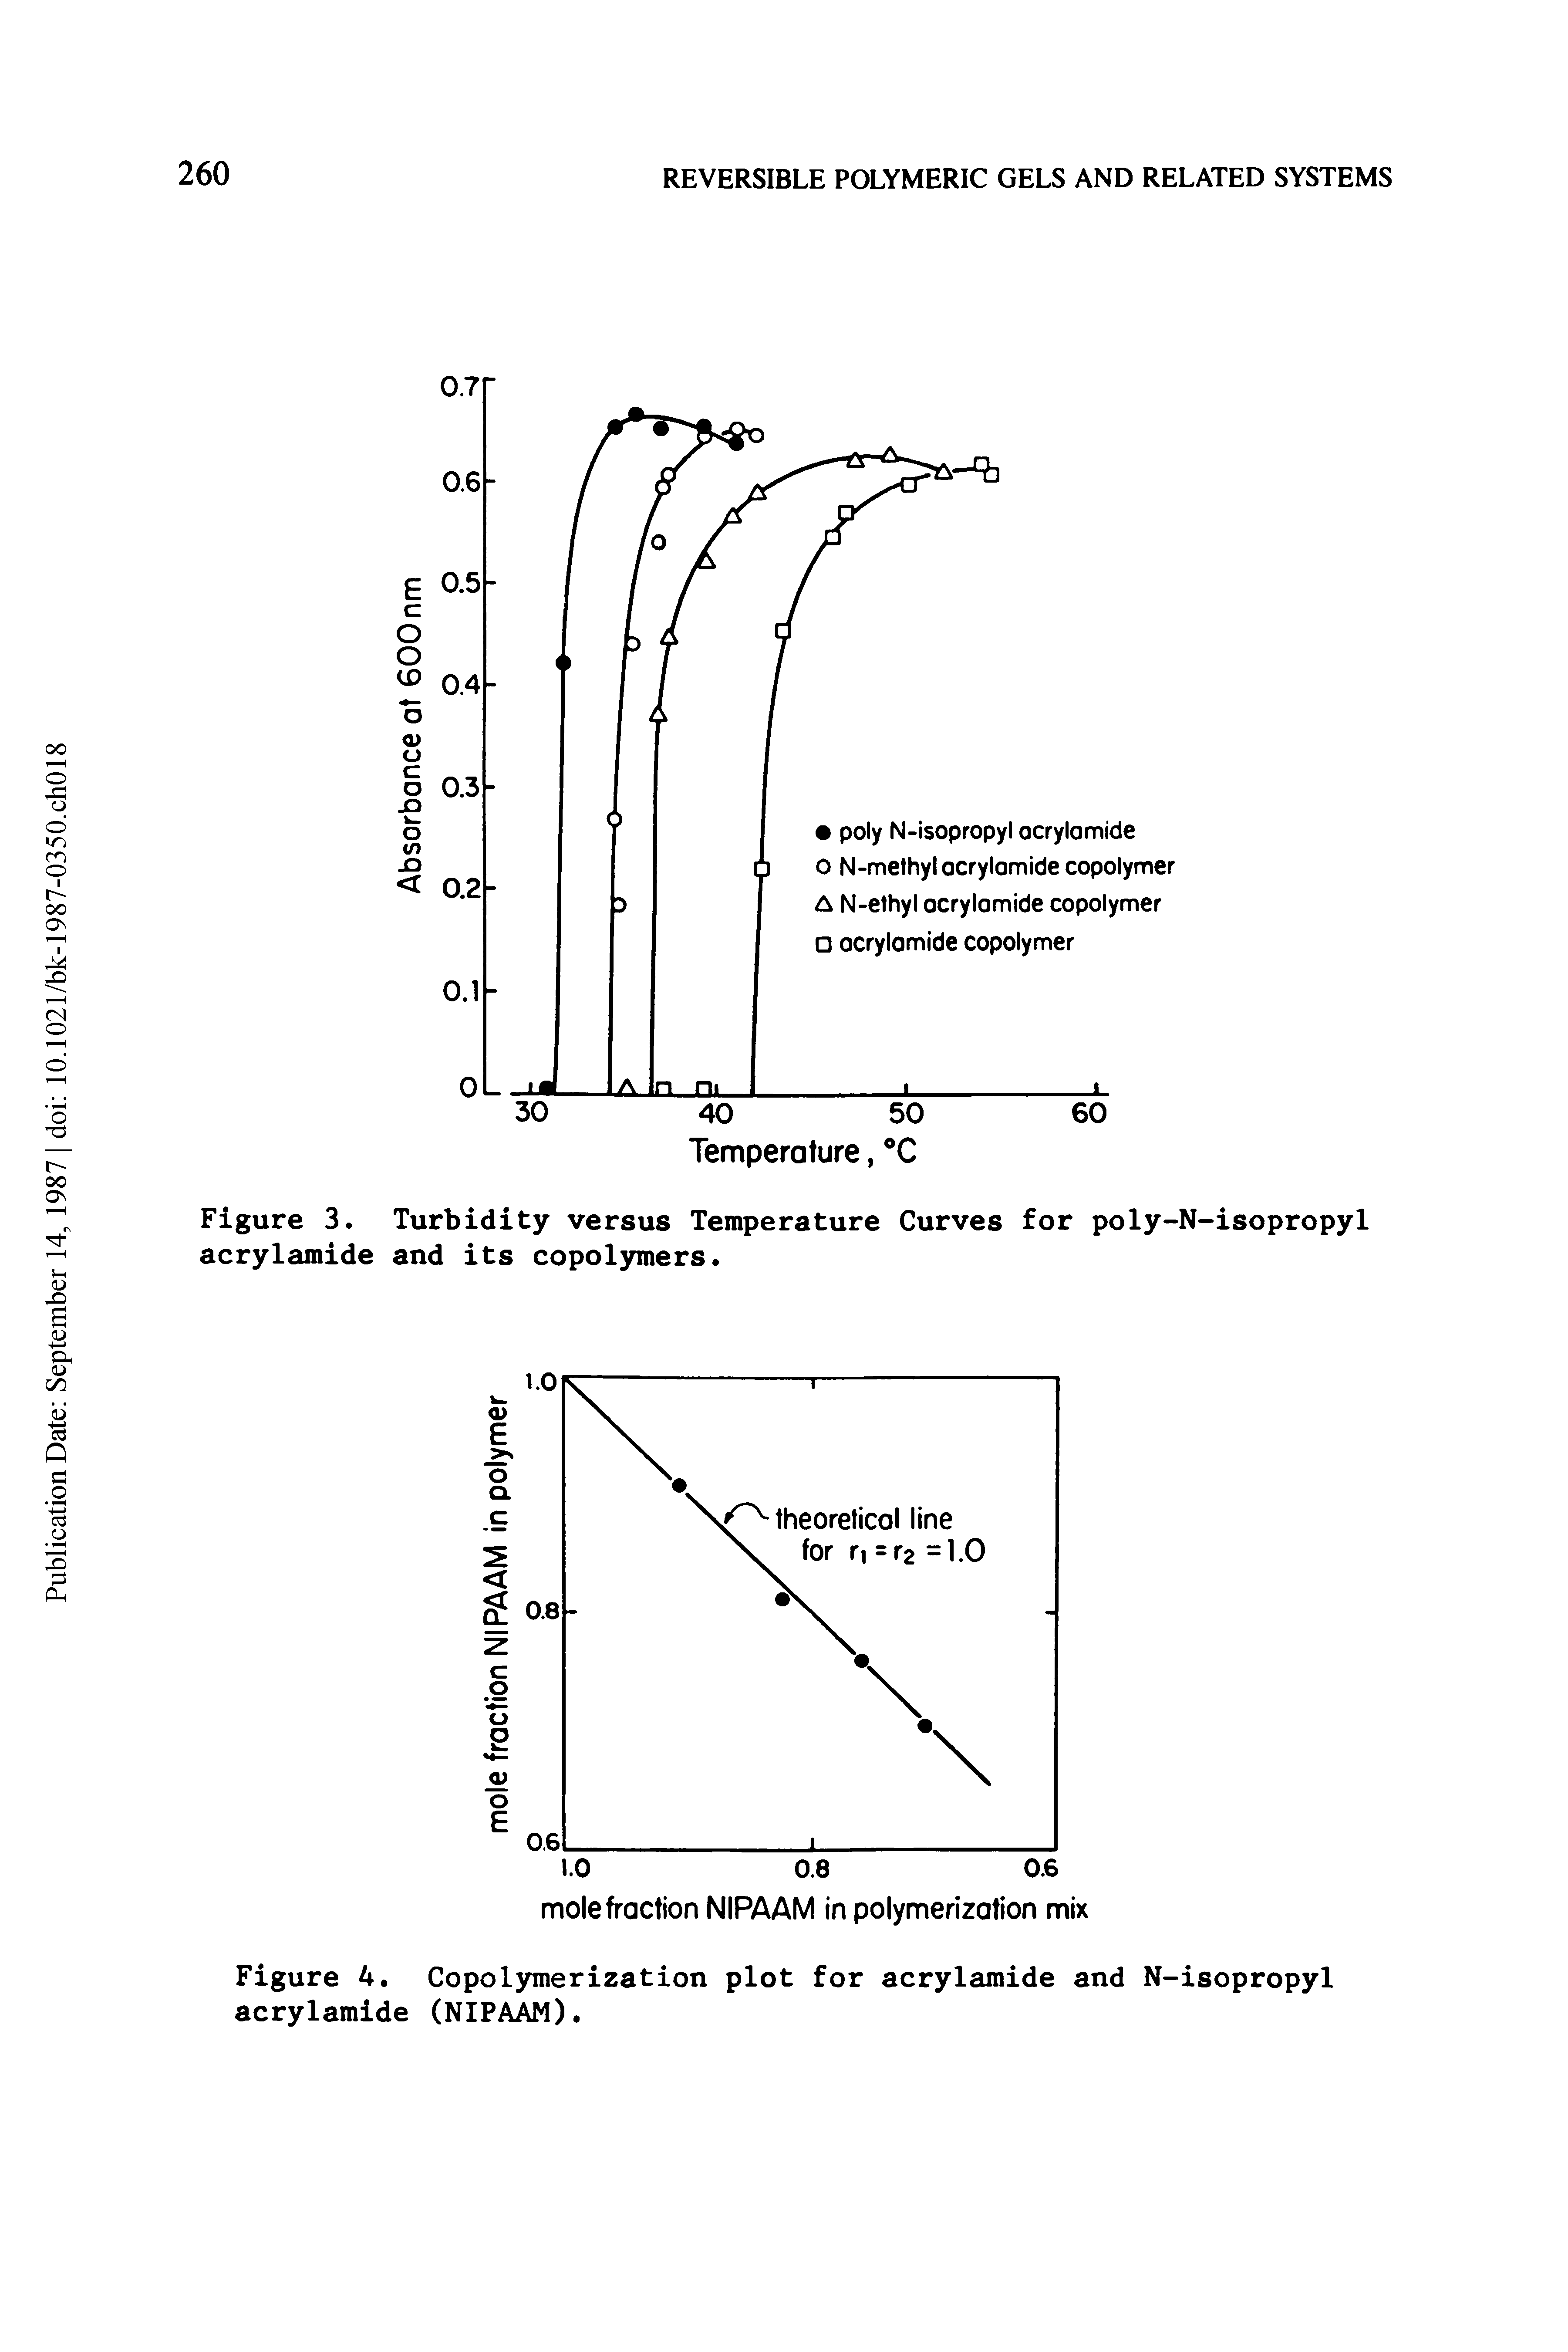 Figure 3. Turbidity versus Temperature Curves for poly-N-isopropyl acrylamide and its copolymers ...